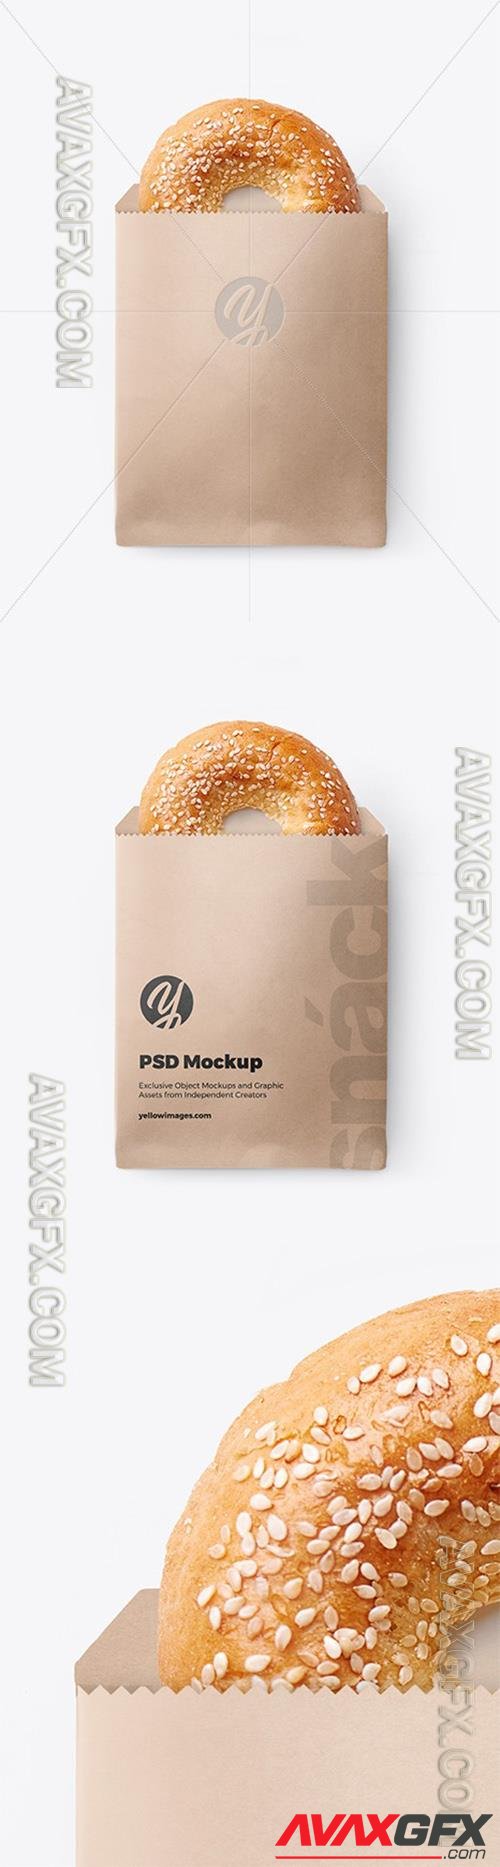 Paper Pack with Donut with Sesame Seeds Mockup 64274 TIF